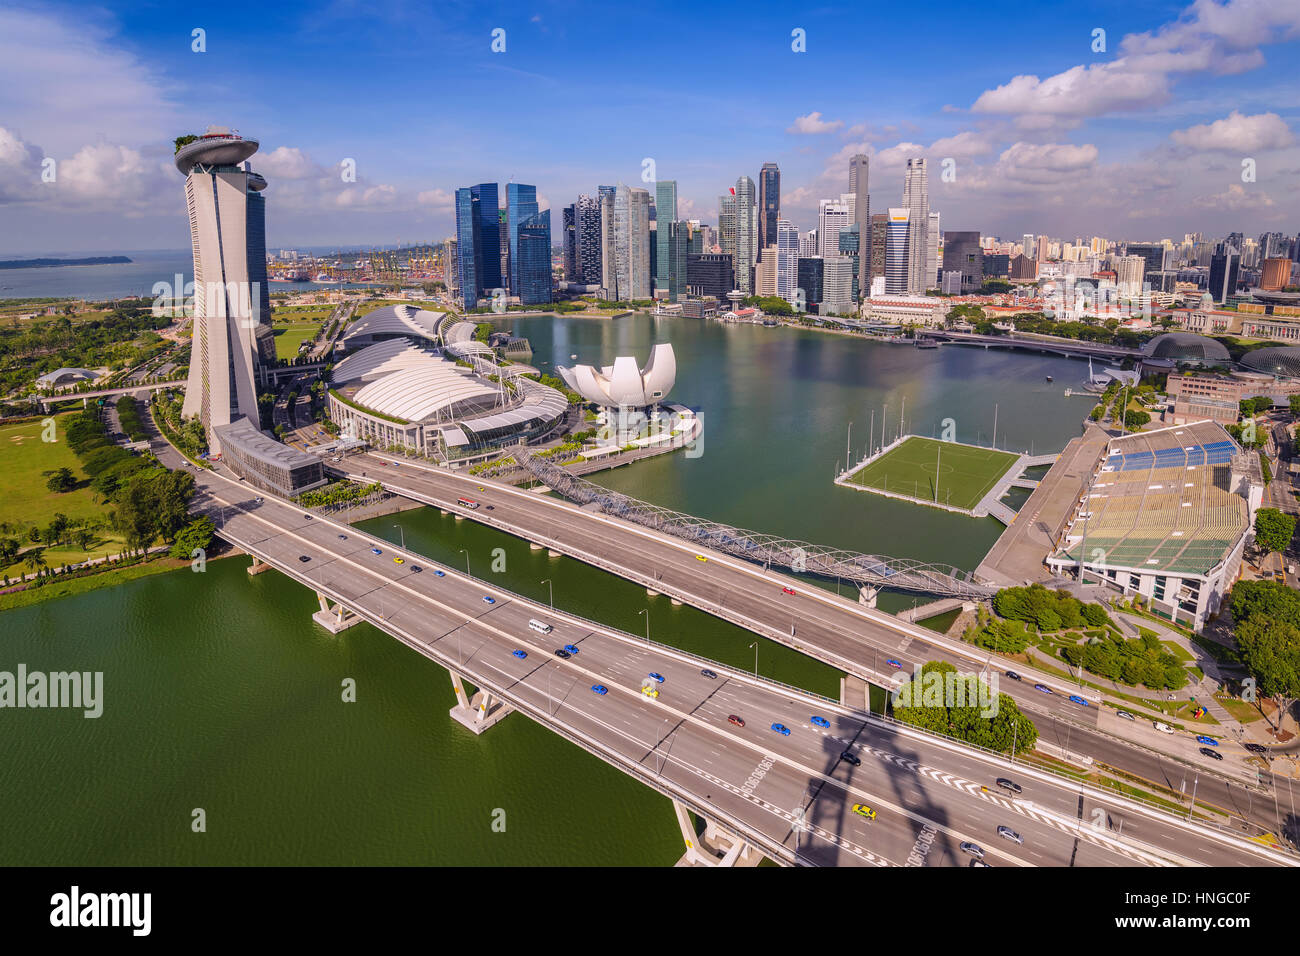 Singapore city skyline at Marina Bay View from Singapore Flyer Banque D'Images